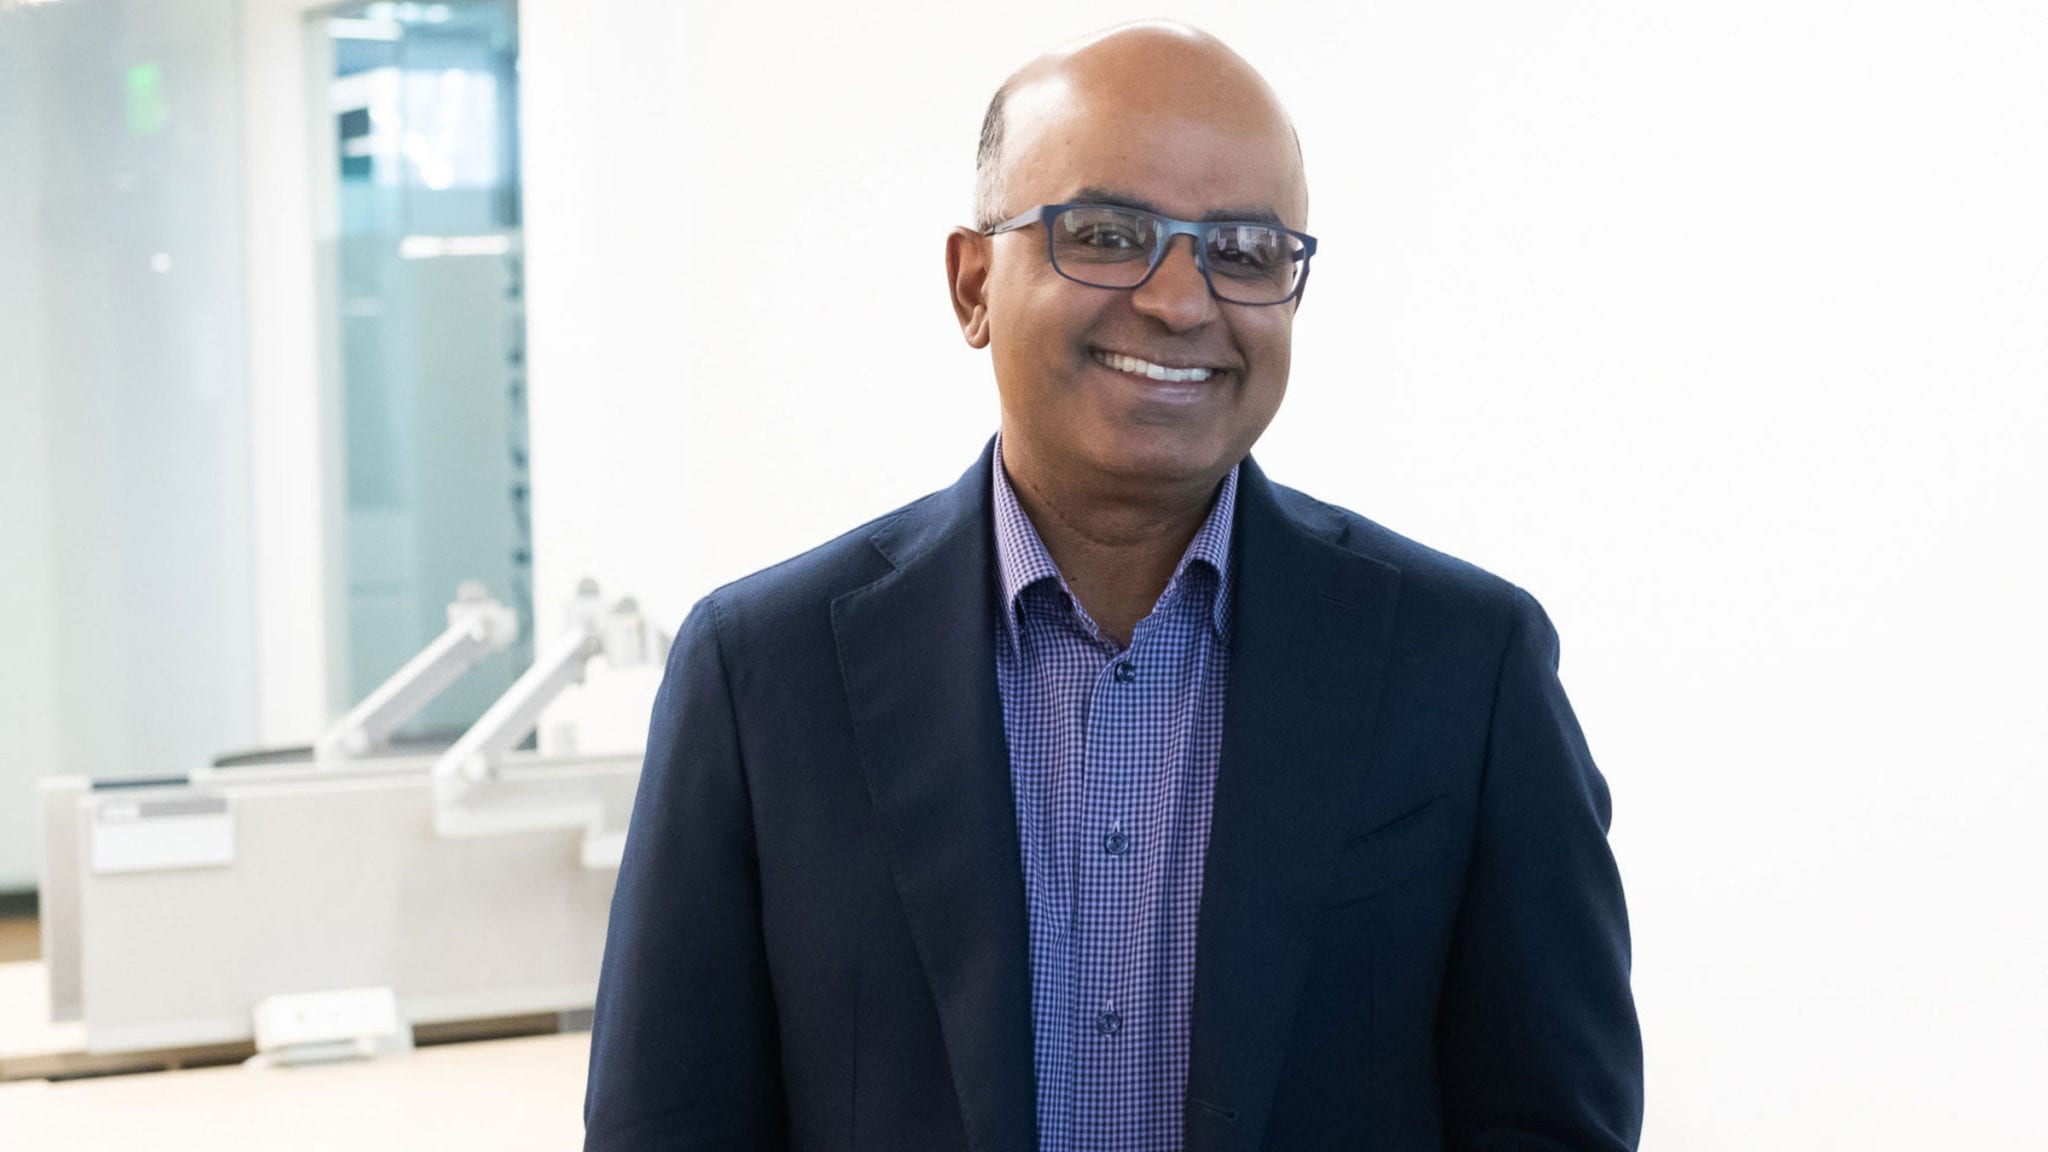 Sekar Kathiresan wants to jump on antibodies and RNAi, says no-till approach to cutting PCSK9 seems sustainable – Endpoints News